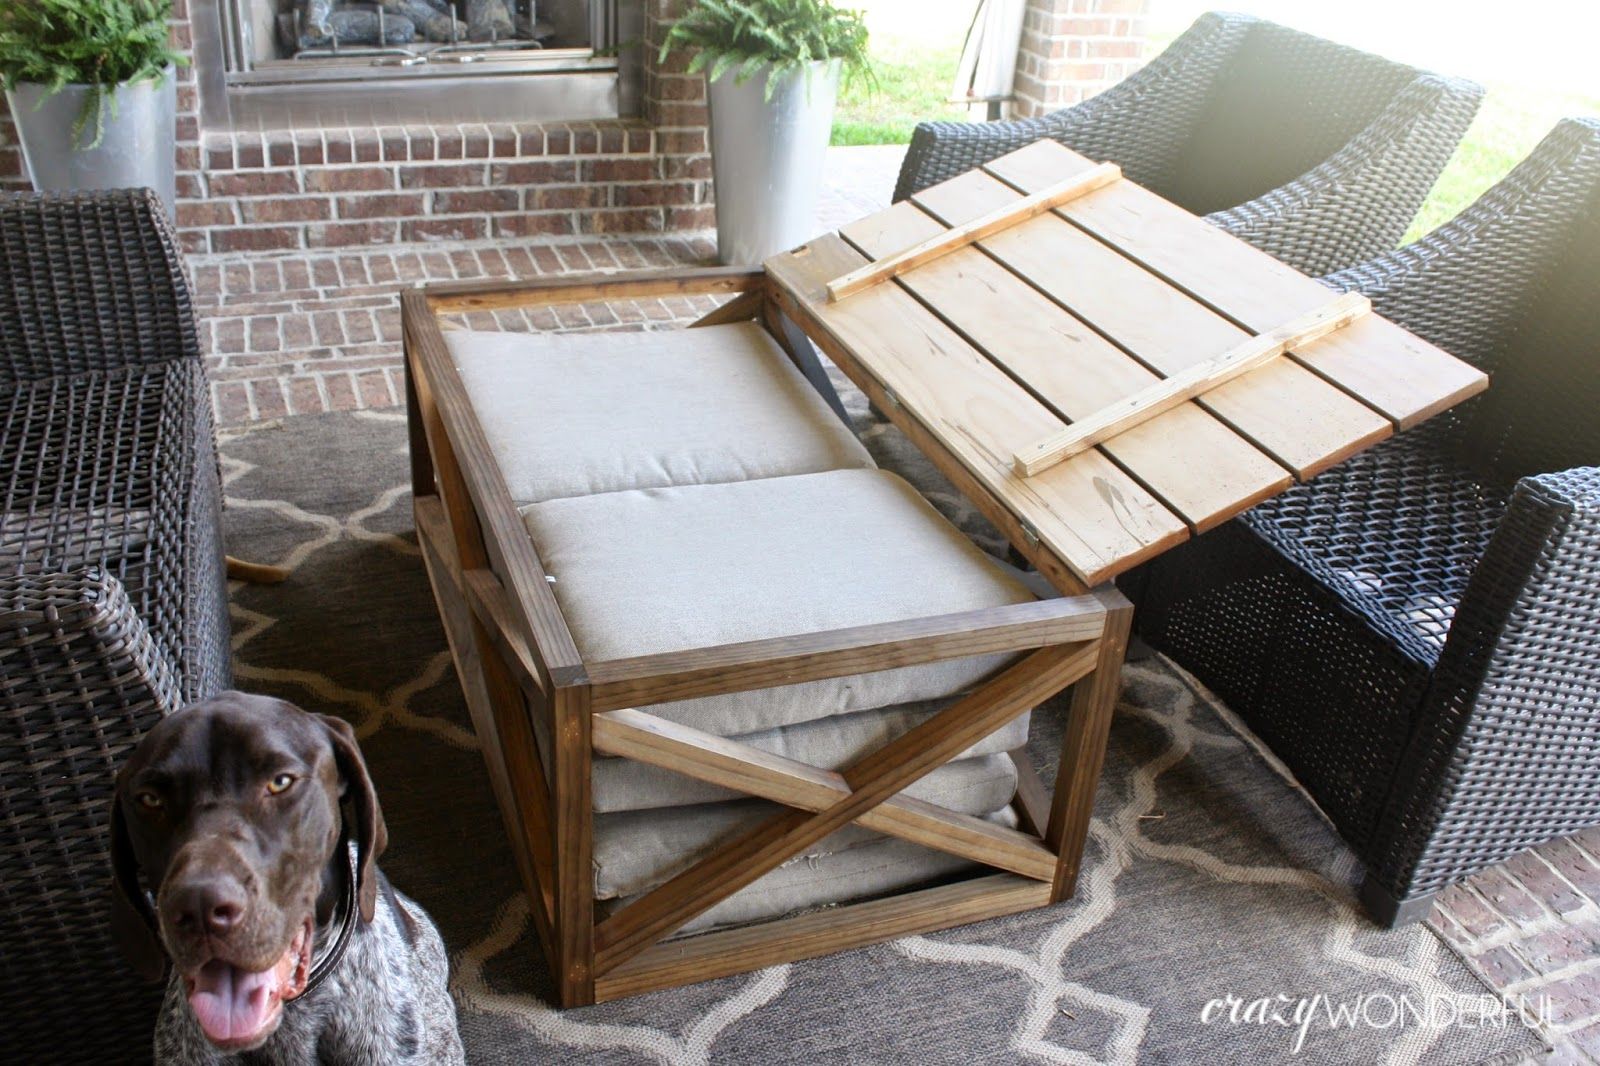 Diy Outdoor Coffee Table | With Storage – Crazy Wonderful With Regard To Outdoor Coffee Tables With Storage (Gallery 6 of 20)